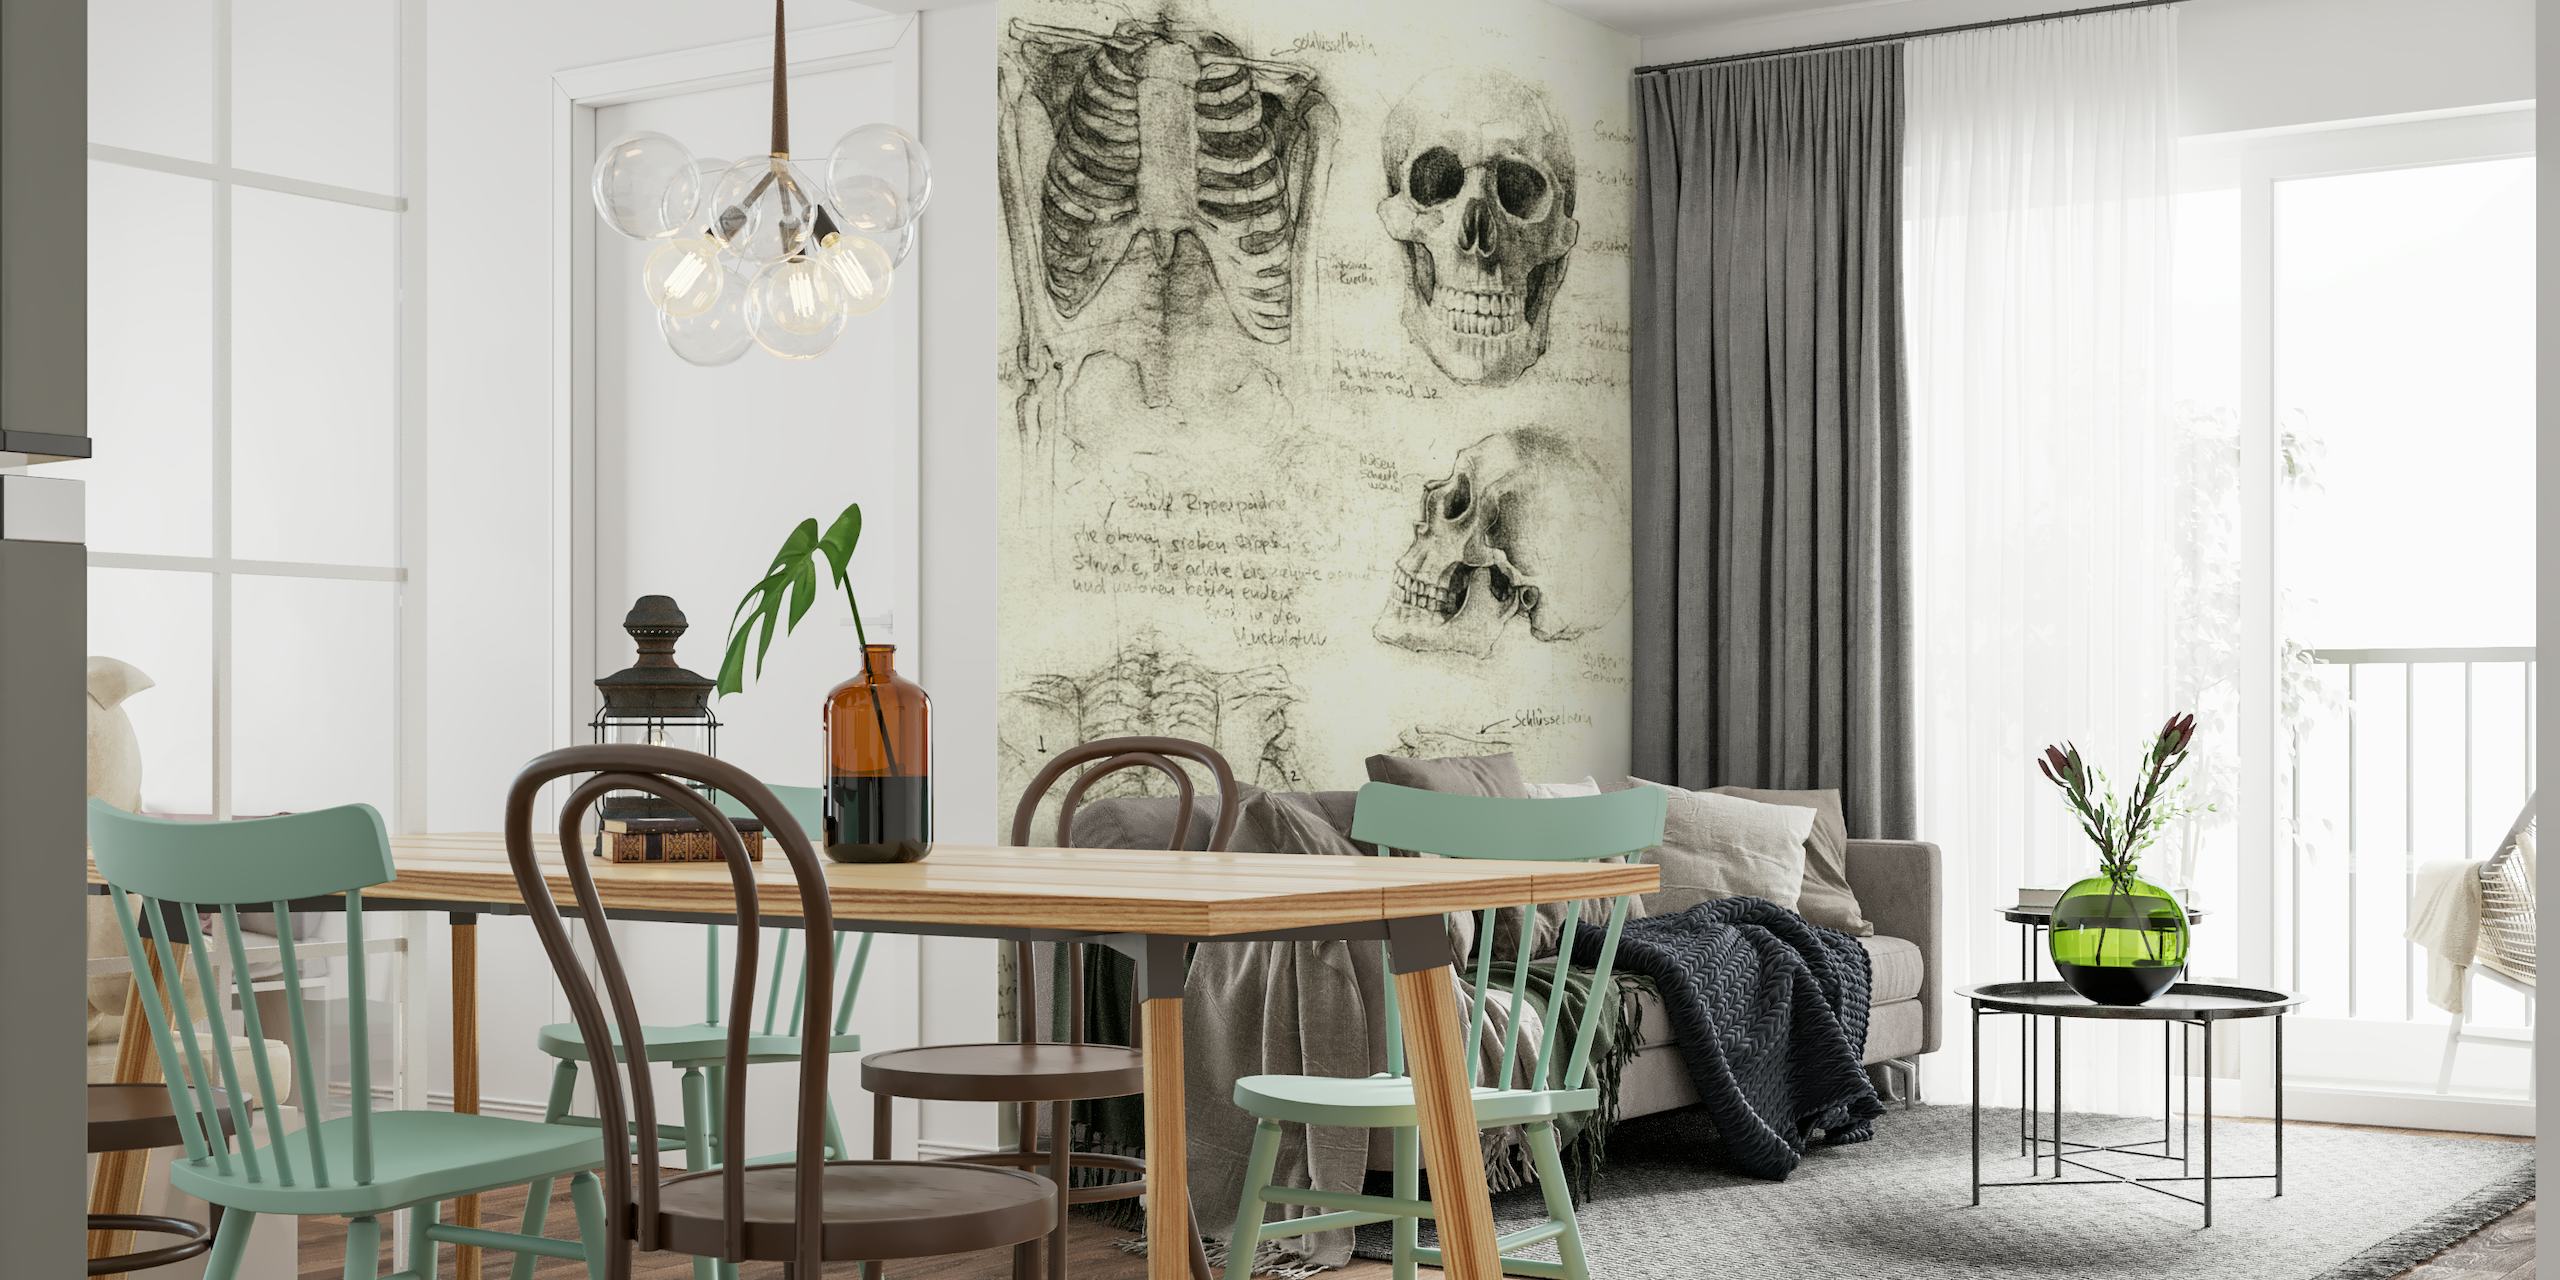 Anatomical skeleton sketches wall mural featuring detailed drawings of human skulls and bones